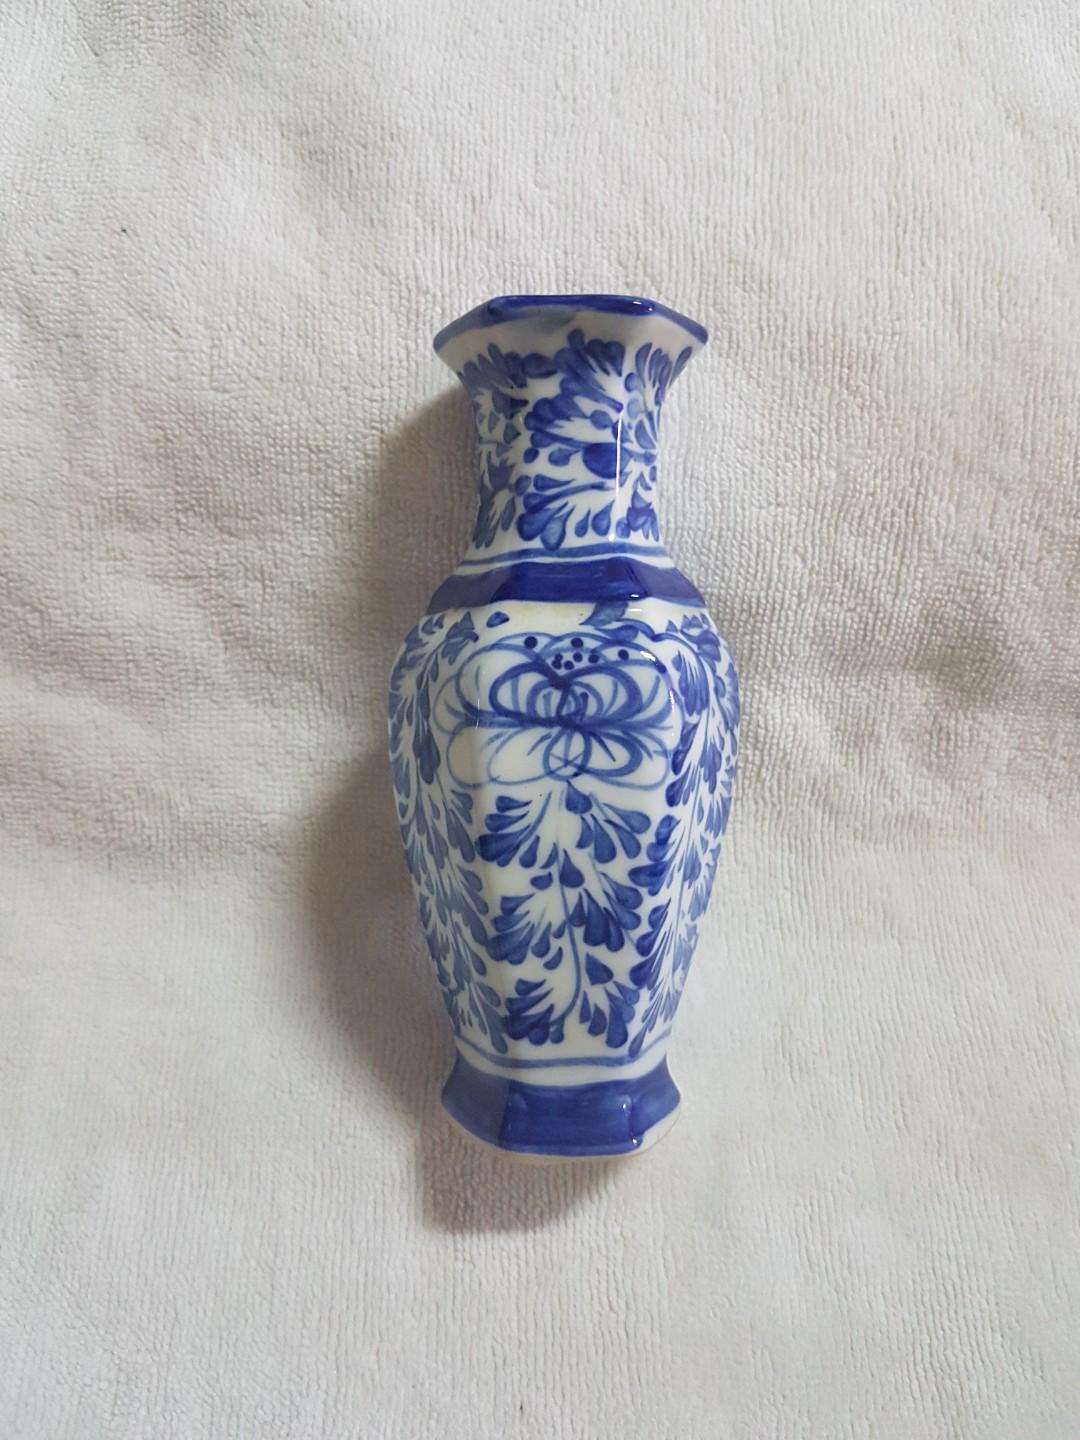 vintage holland handpainted blue white delft mini vase t id=CuhElTWxWI &t referrer browse type=item item rec&t referrer product id= &t referrer source=listing page&t tap index=7